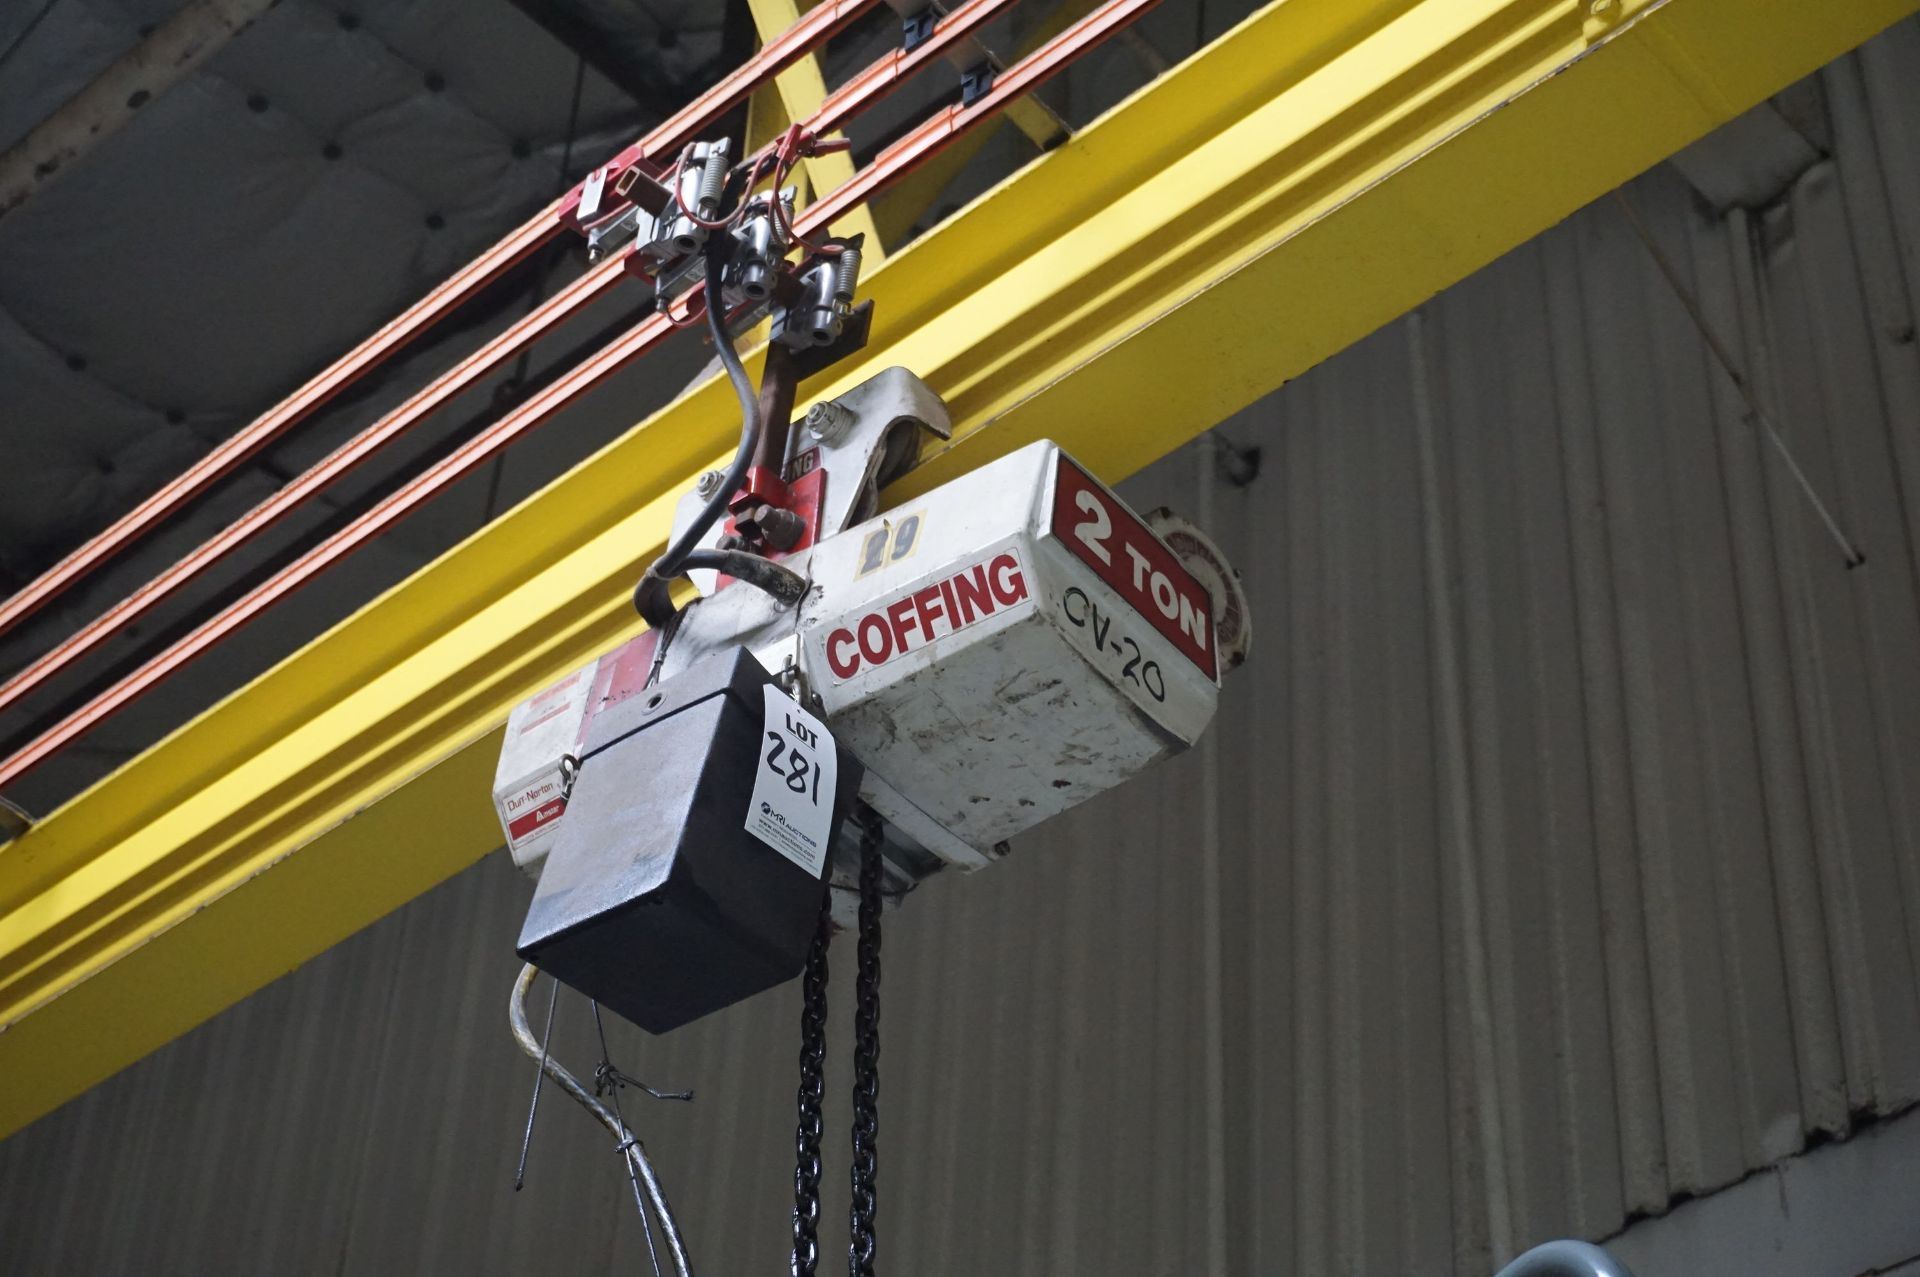 2-TON CRANE WITH COFFING CHAIN HOIST **Rigging provided exclusively by Golden Bear Services. Loading